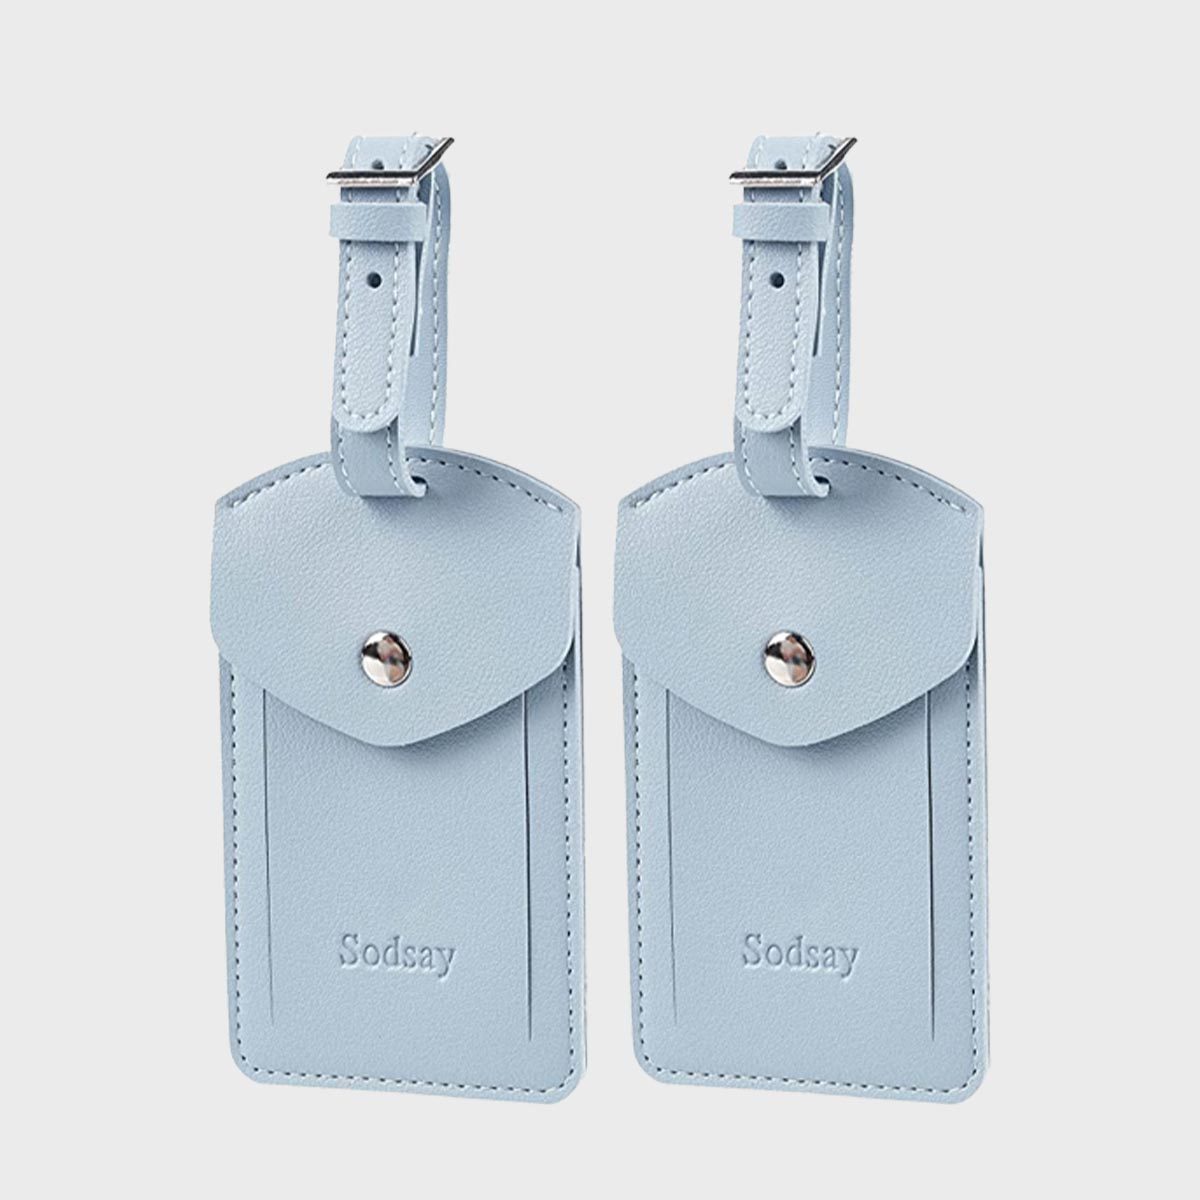 <p>These <a href="https://www.amazon.com/Sodsay-Leather-Luggage-Baggage-Privacy/dp/B07V6XZB9S" rel="noopener">Sodsay tags</a> come in 28 different colors to match your personal aesthetic. A snap closure flap adds a cool vintage parcel look to these best luggage tags. Plus, a double-layer faux-leather construction and reinforced stitching on the straps ensure durability (and <a href="https://www.rd.com/article/sustainable-travel/">sustainability</a>) for all your upcoming trips.</p> <p class="listicle-page__cta-button-shop"><a class="shop-btn" href="https://www.amazon.com/Sodsay-Leather-Luggage-Baggage-Privacy/dp/B07V6XZB9S">Shop Now</a></p>